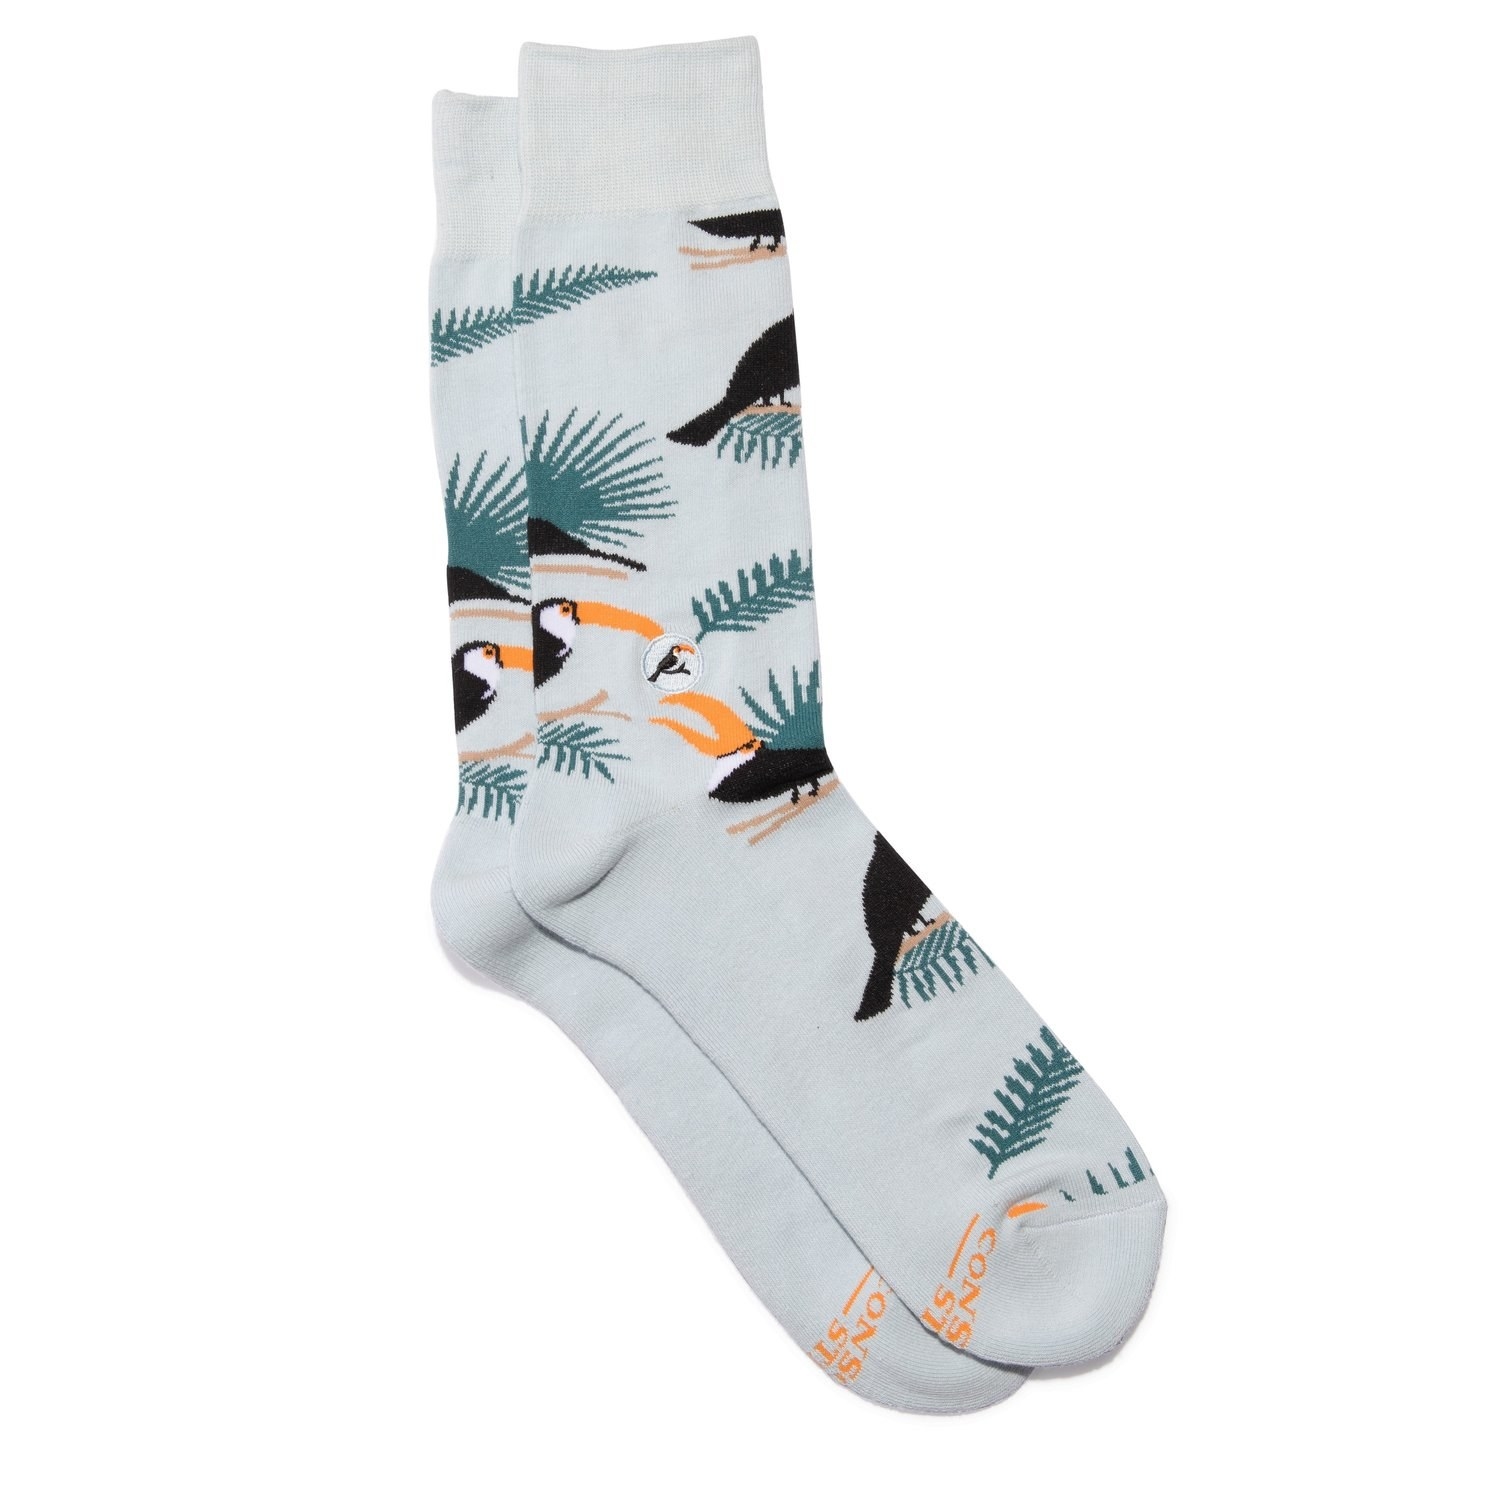 socks with a toucan print on them 